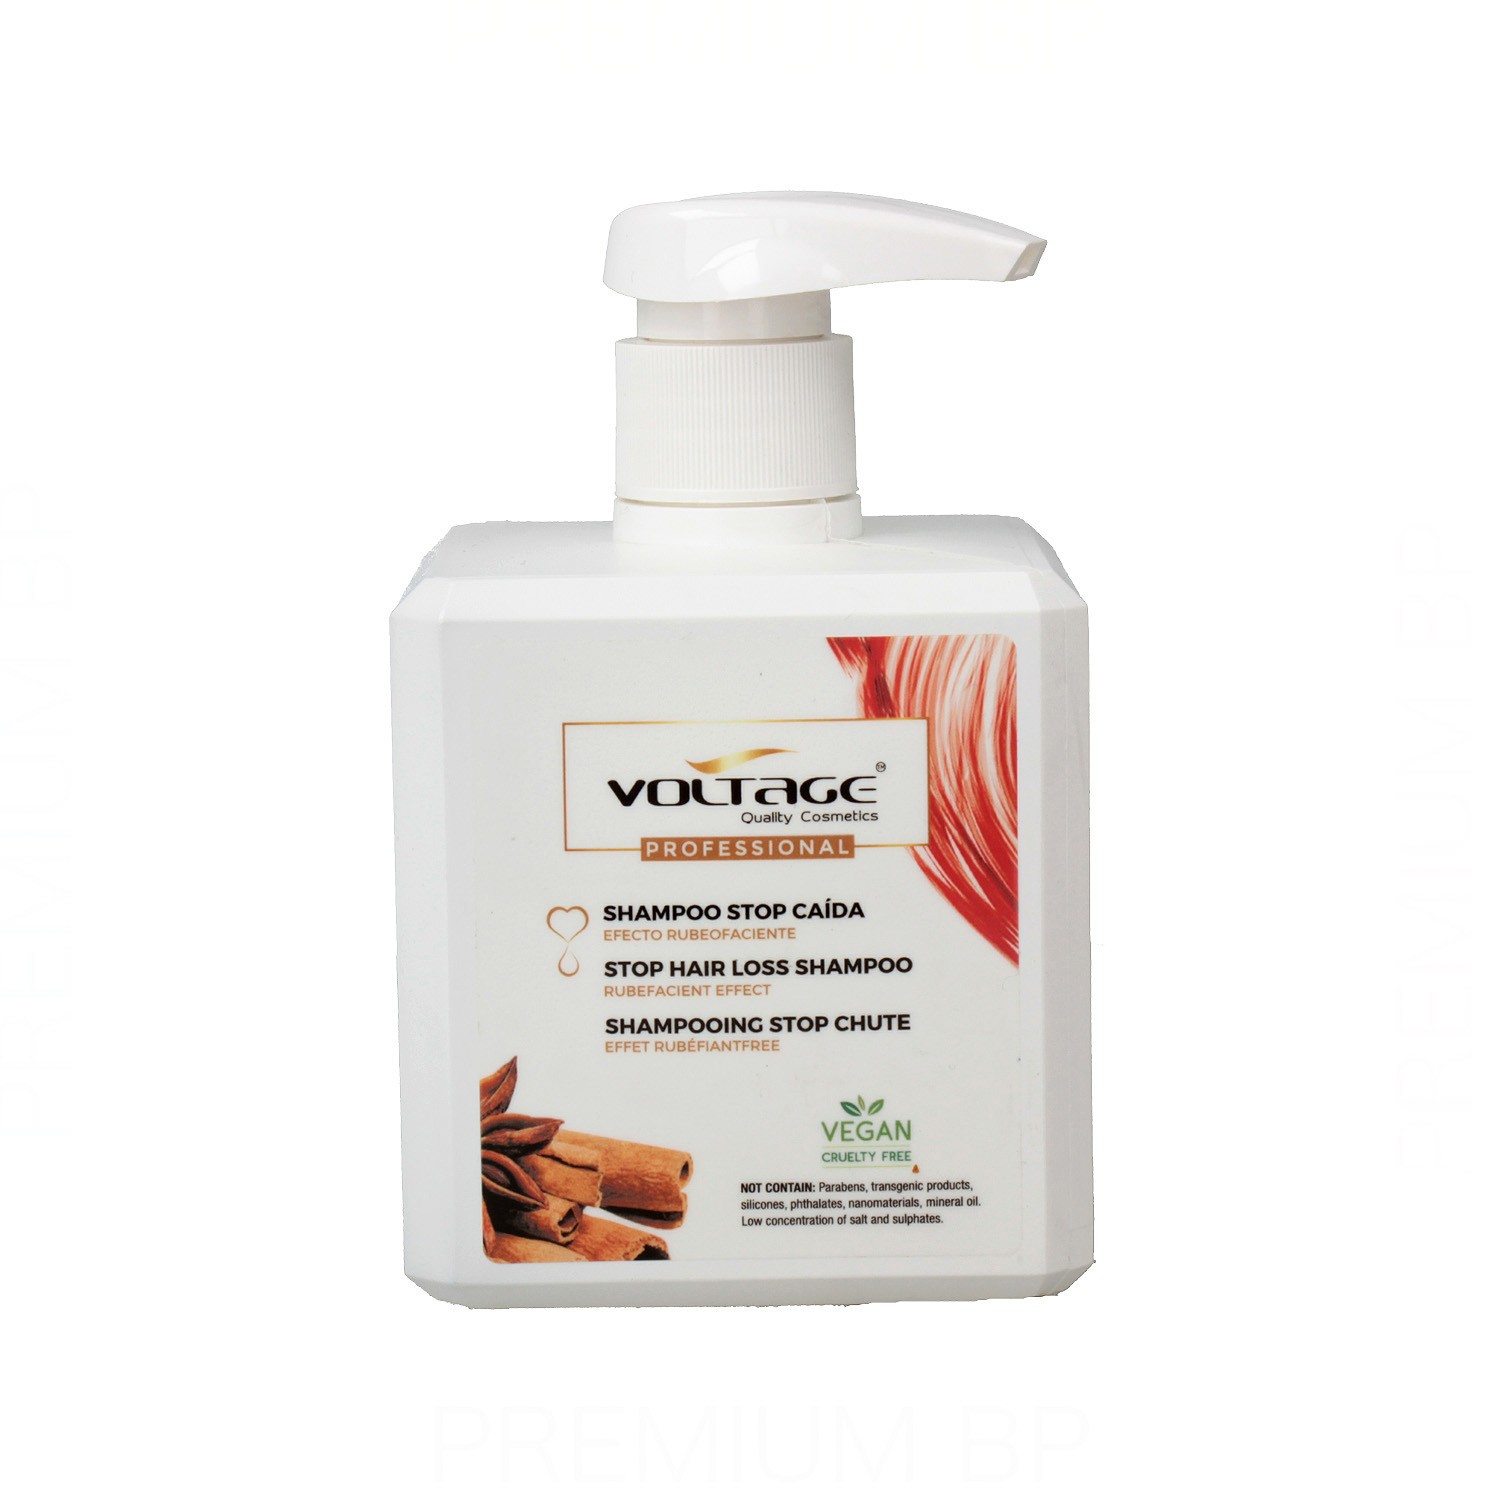 Voltage Professionnel Chute Shampooing 450 ml